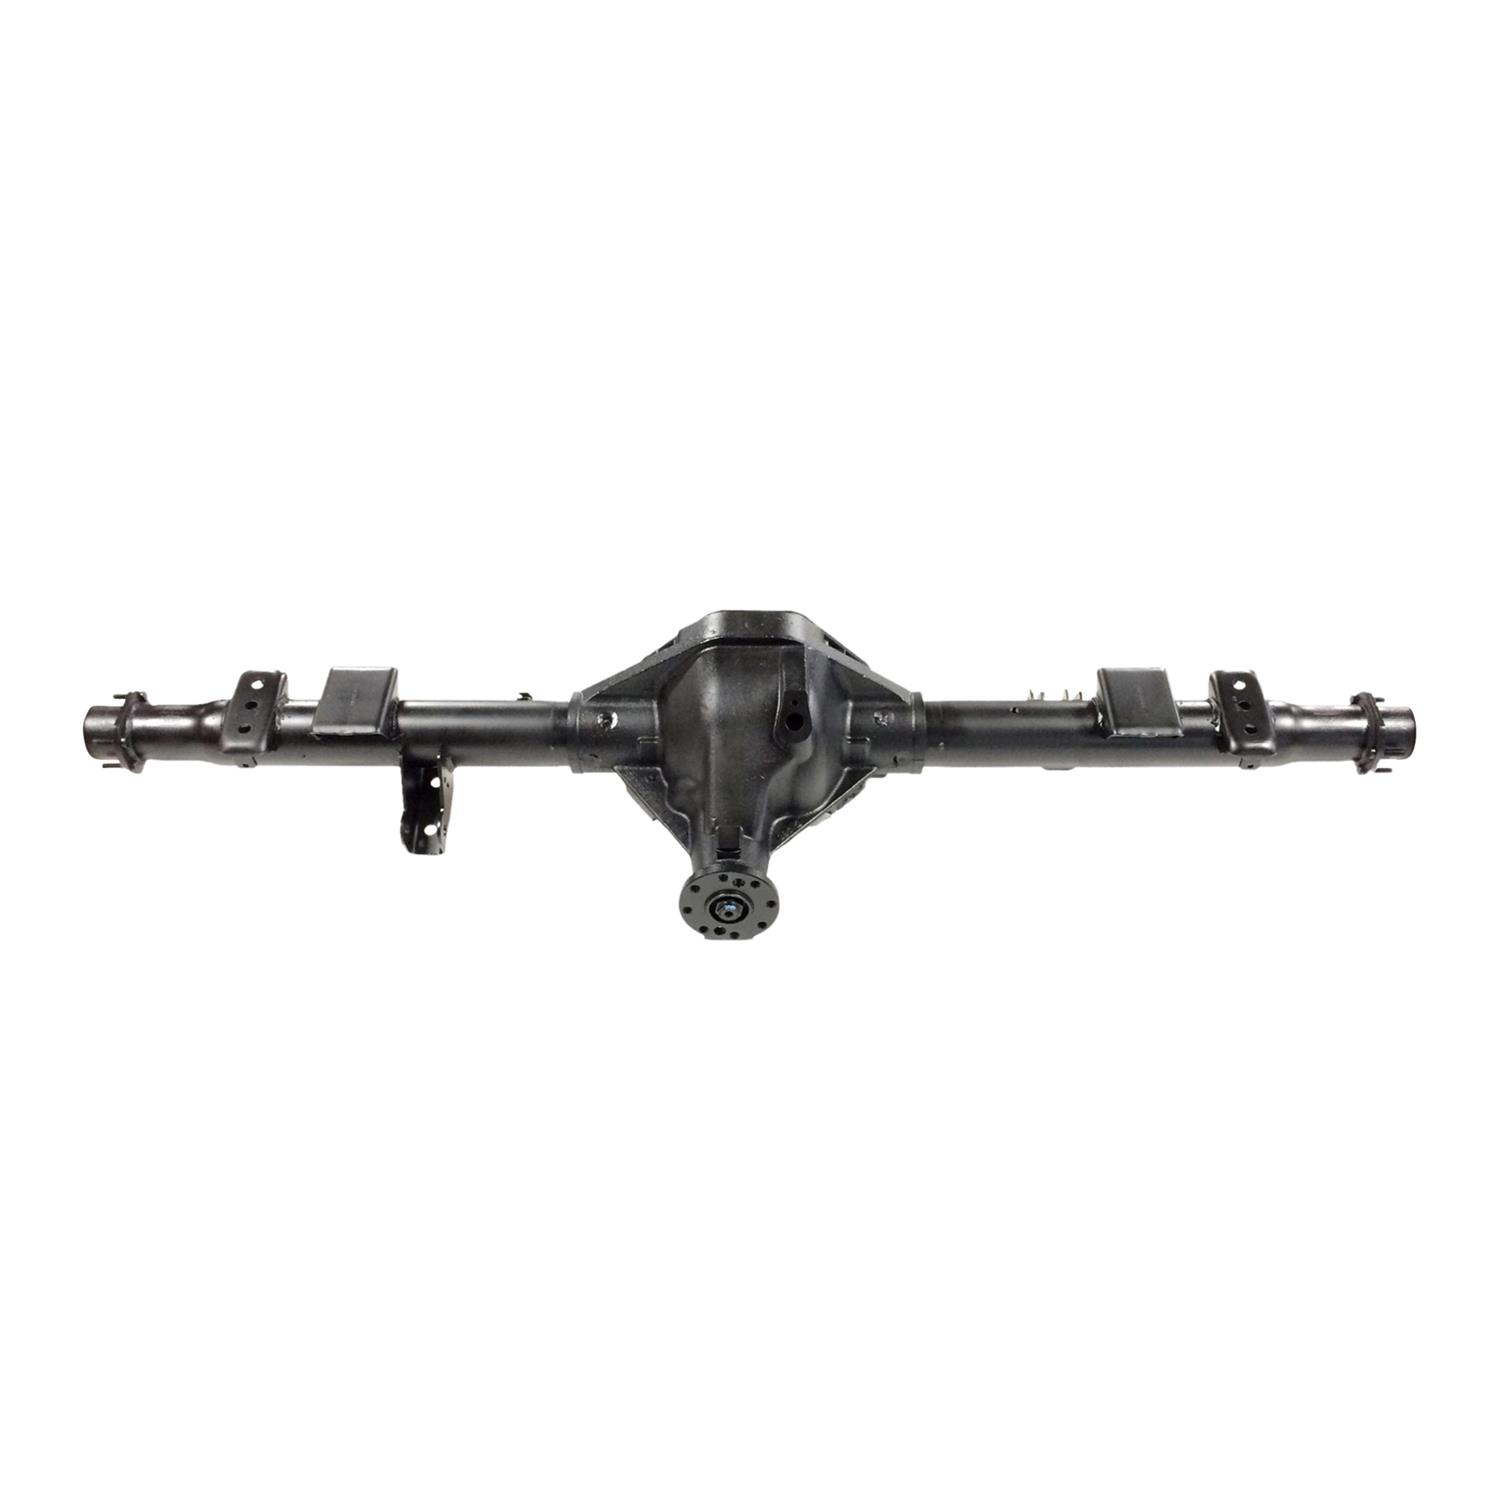 Remanufactured Chrysler 9.25 Rear Open Axle 4.10 Gears 2WD